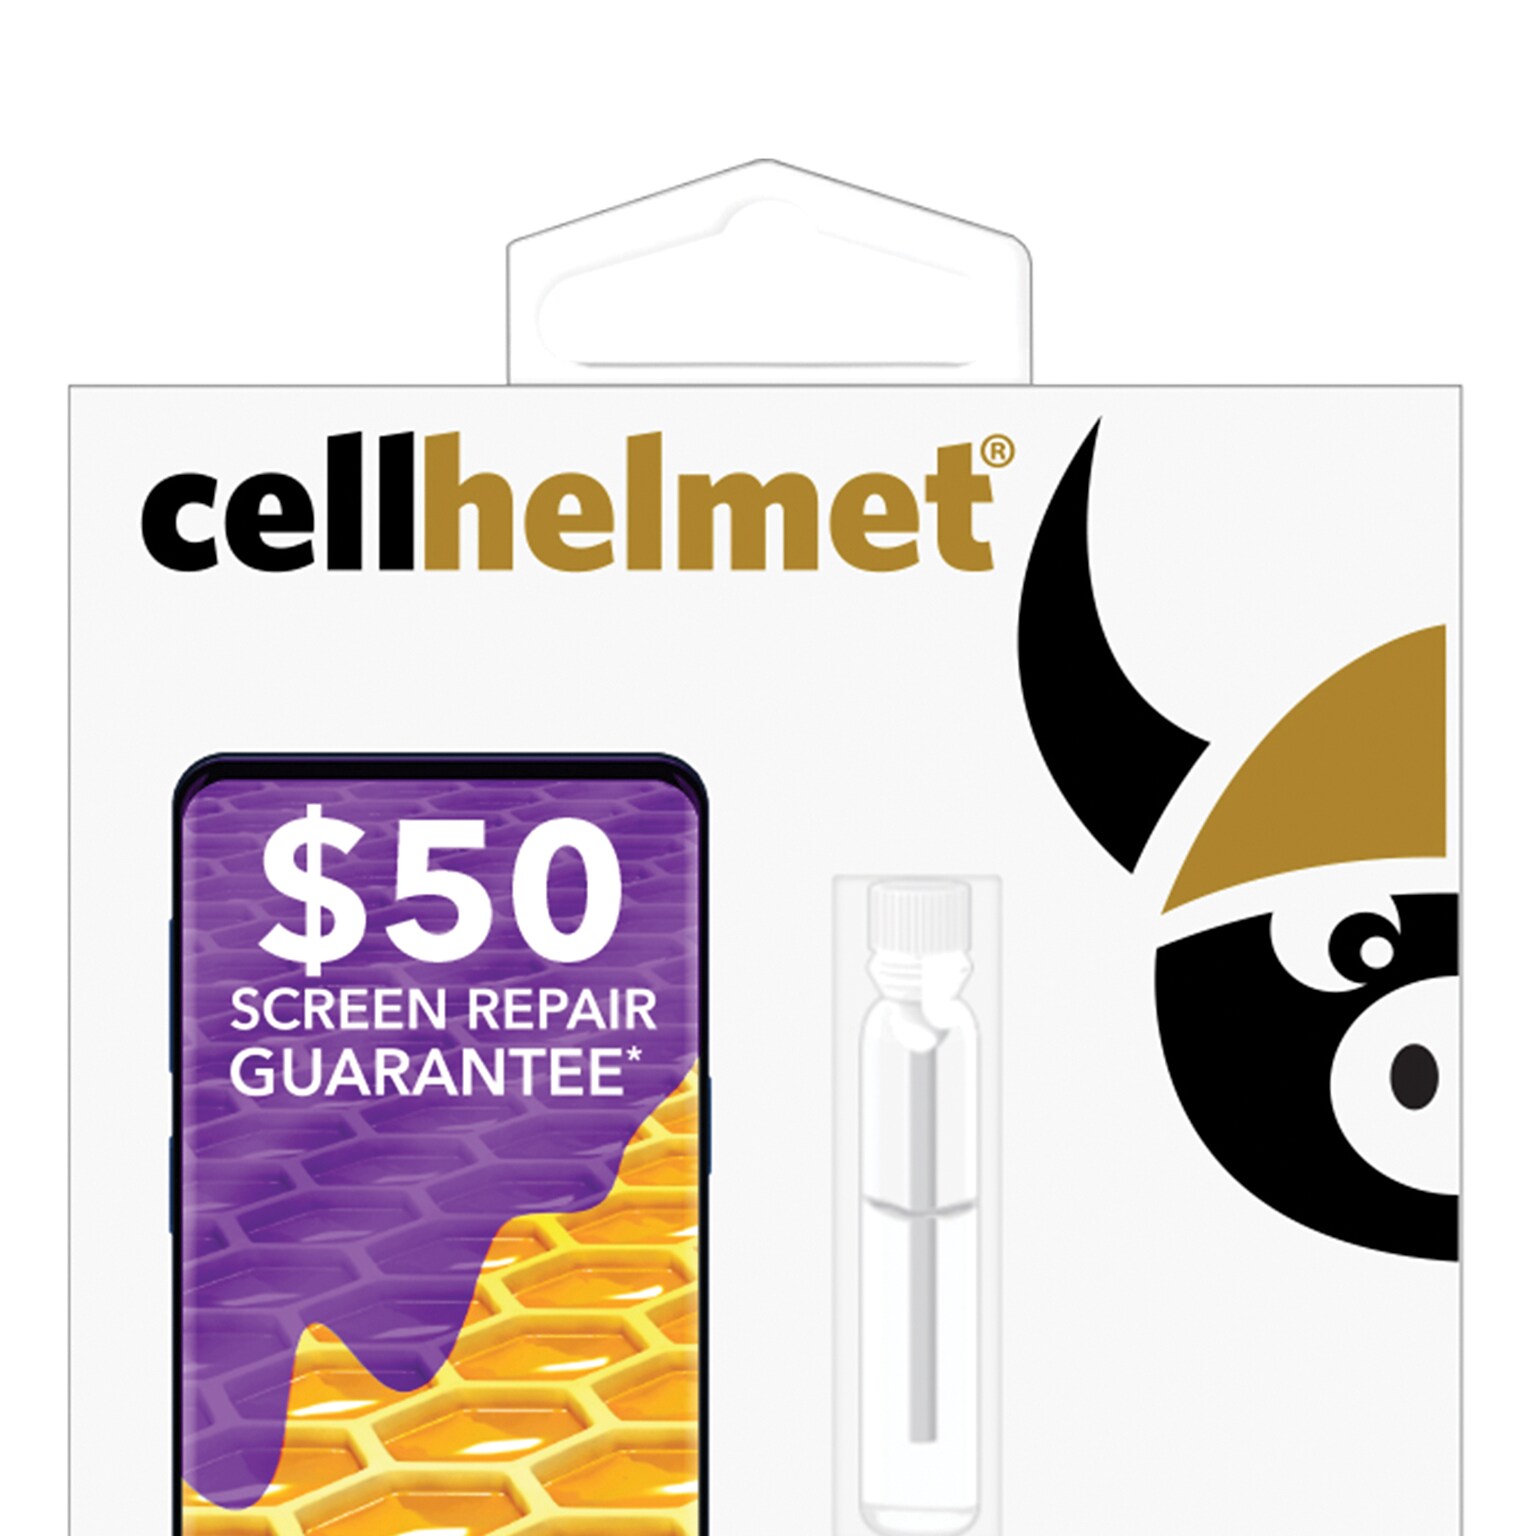 cellhelmet Liquid Glass Screen Protector for Phones and Watches with Glass Screens ($50 Screen Repair Coverage), (LSP-PHONE-50)